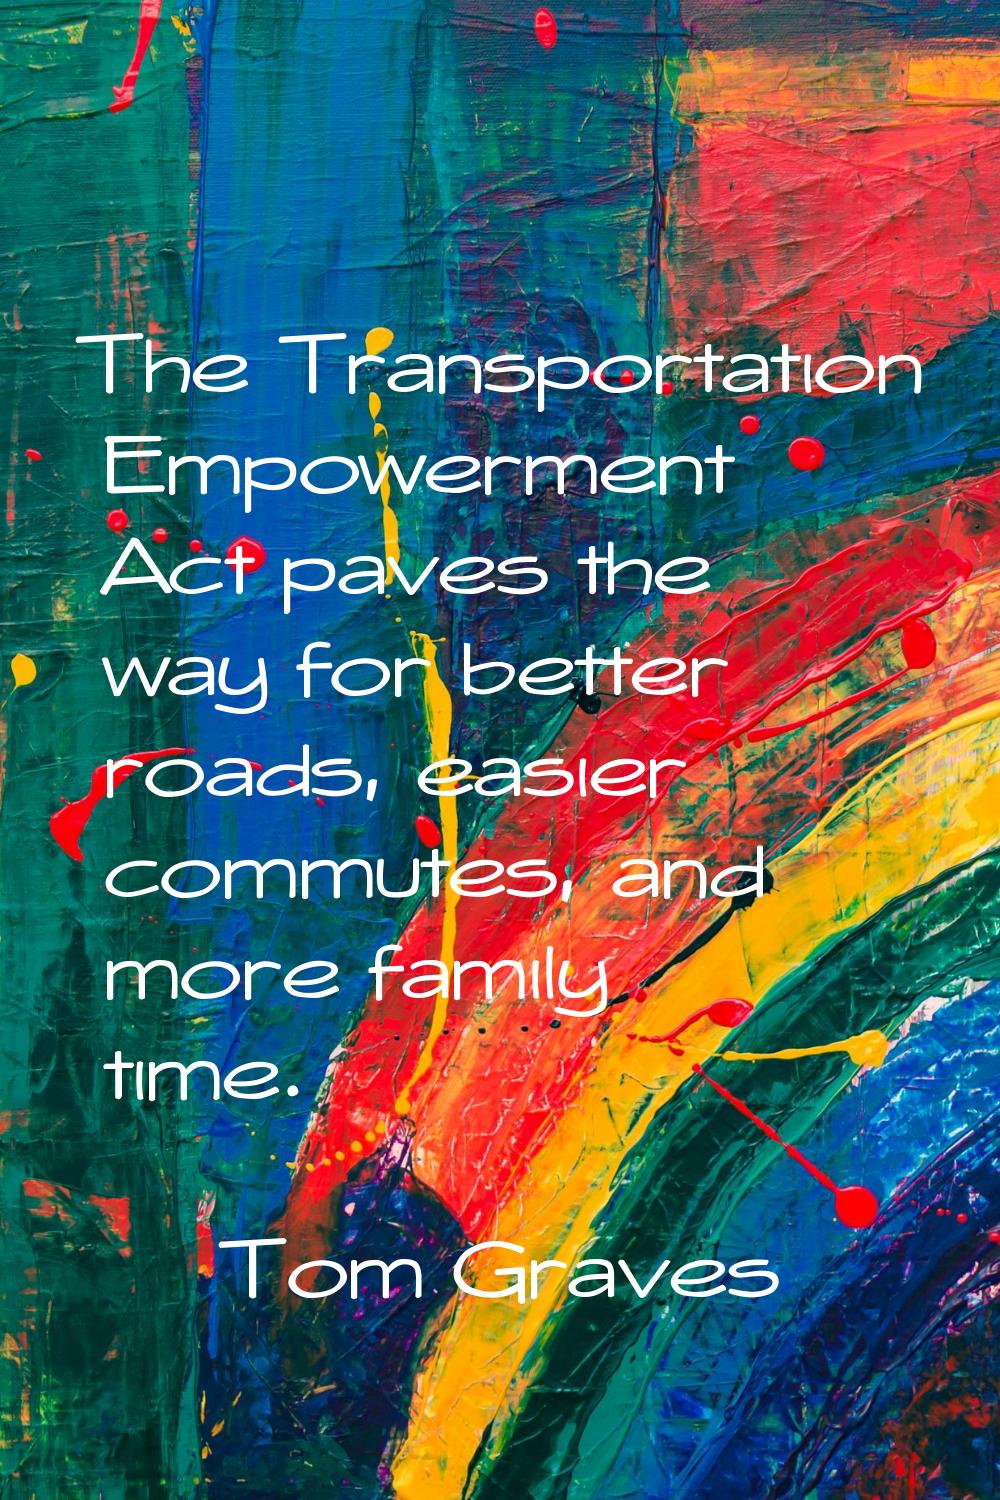 The Transportation Empowerment Act paves the way for better roads, easier commutes, and more family